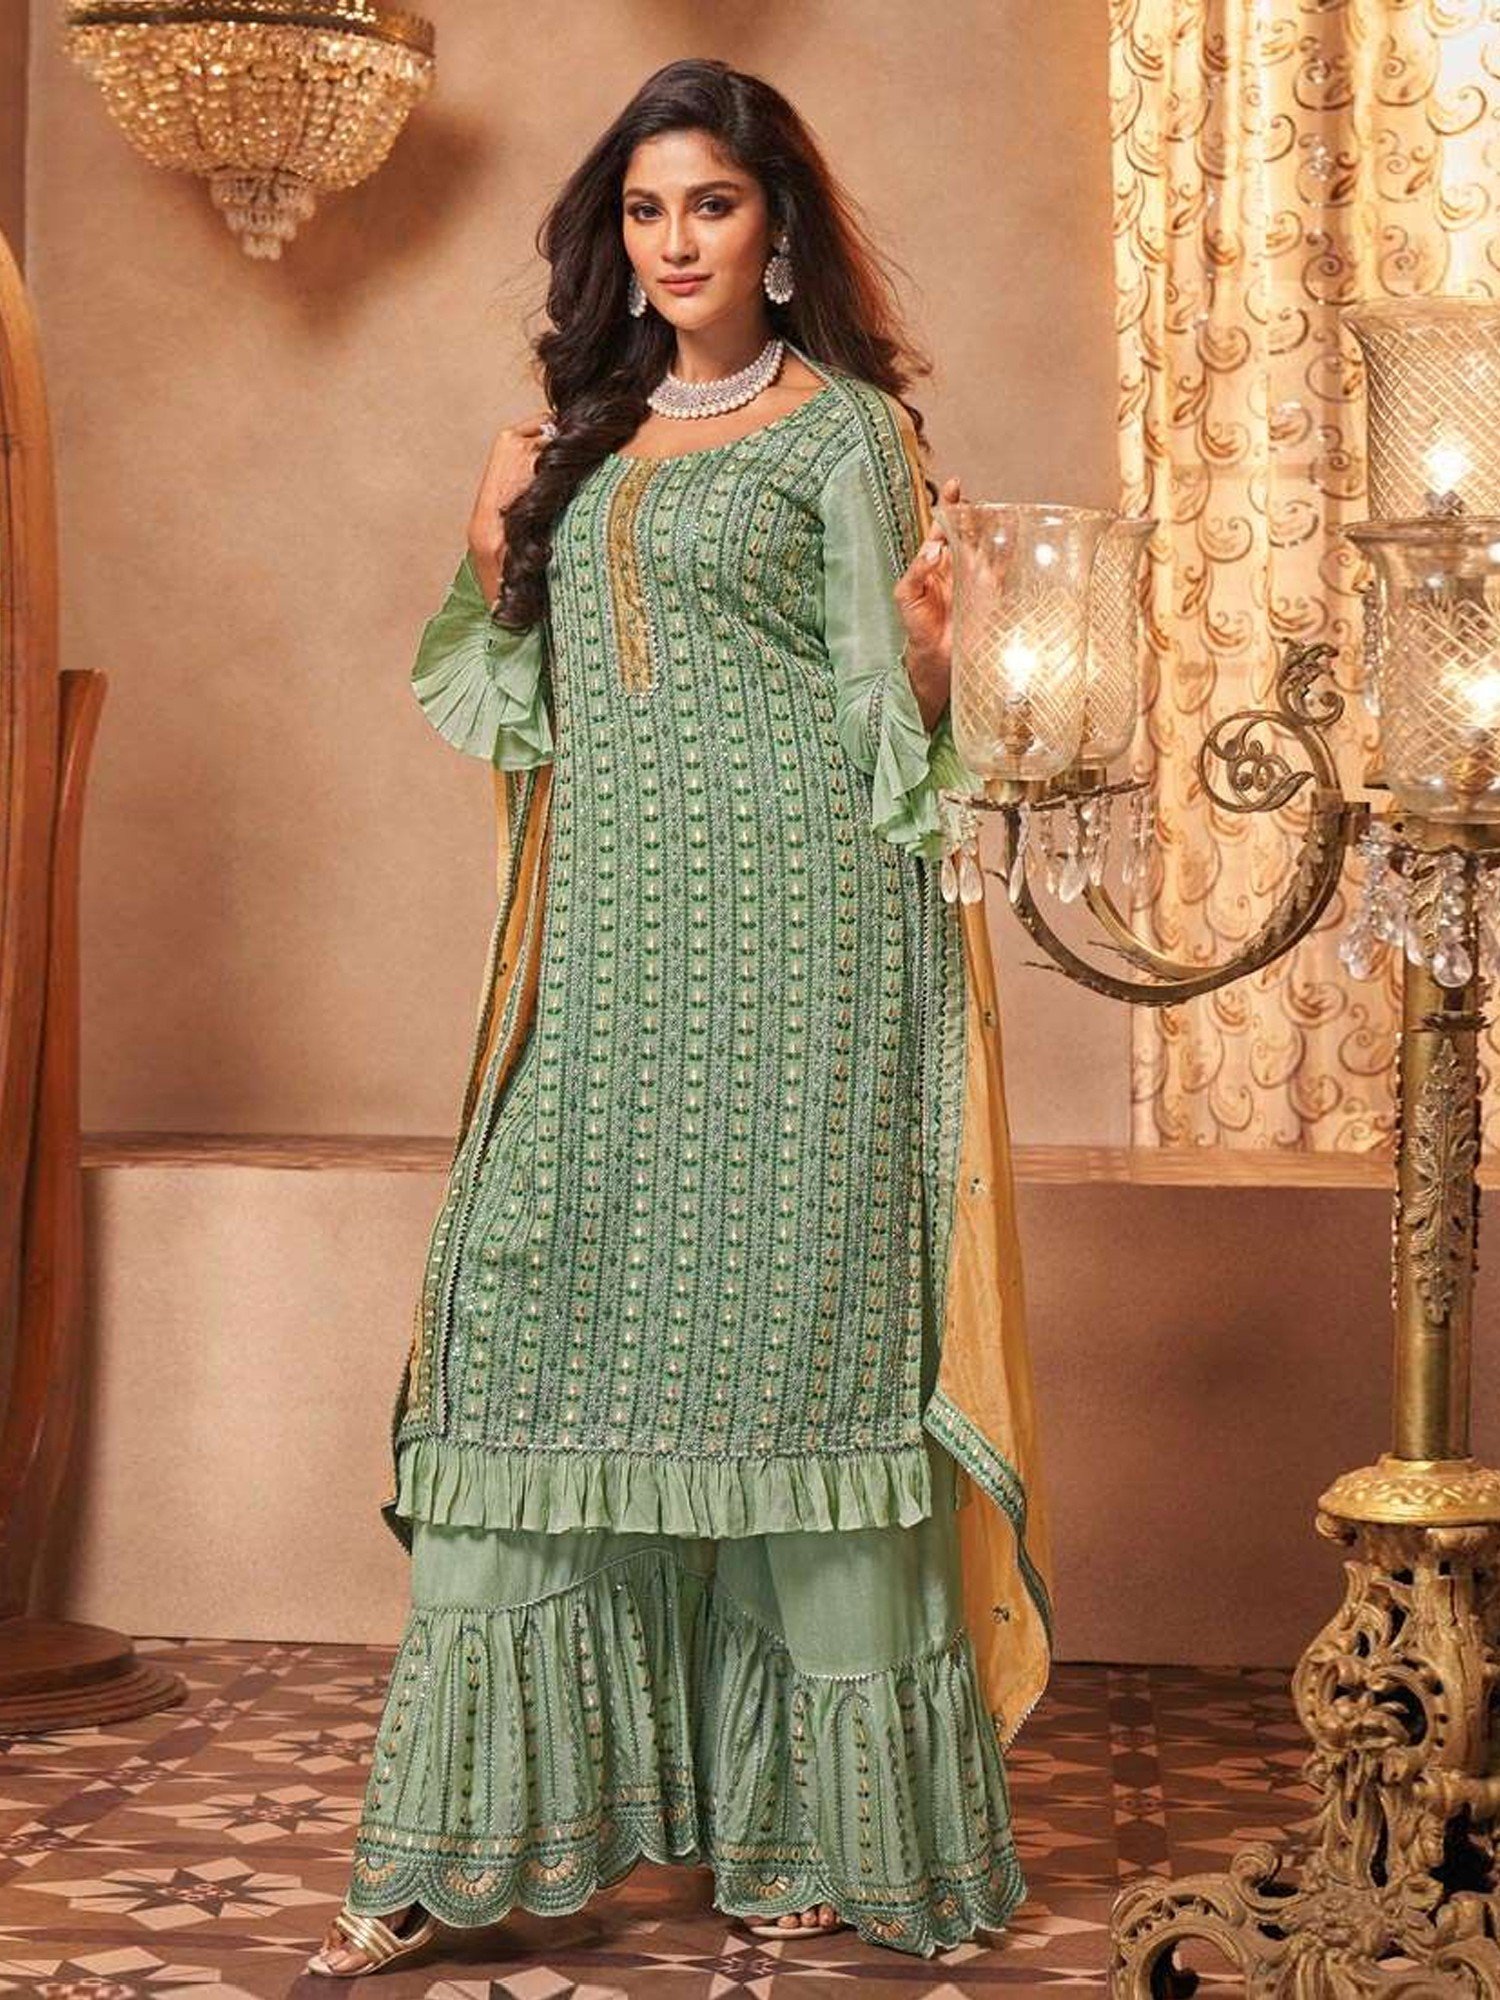 Share 80+ trouser kameez designs for ladies best - in.cdgdbentre